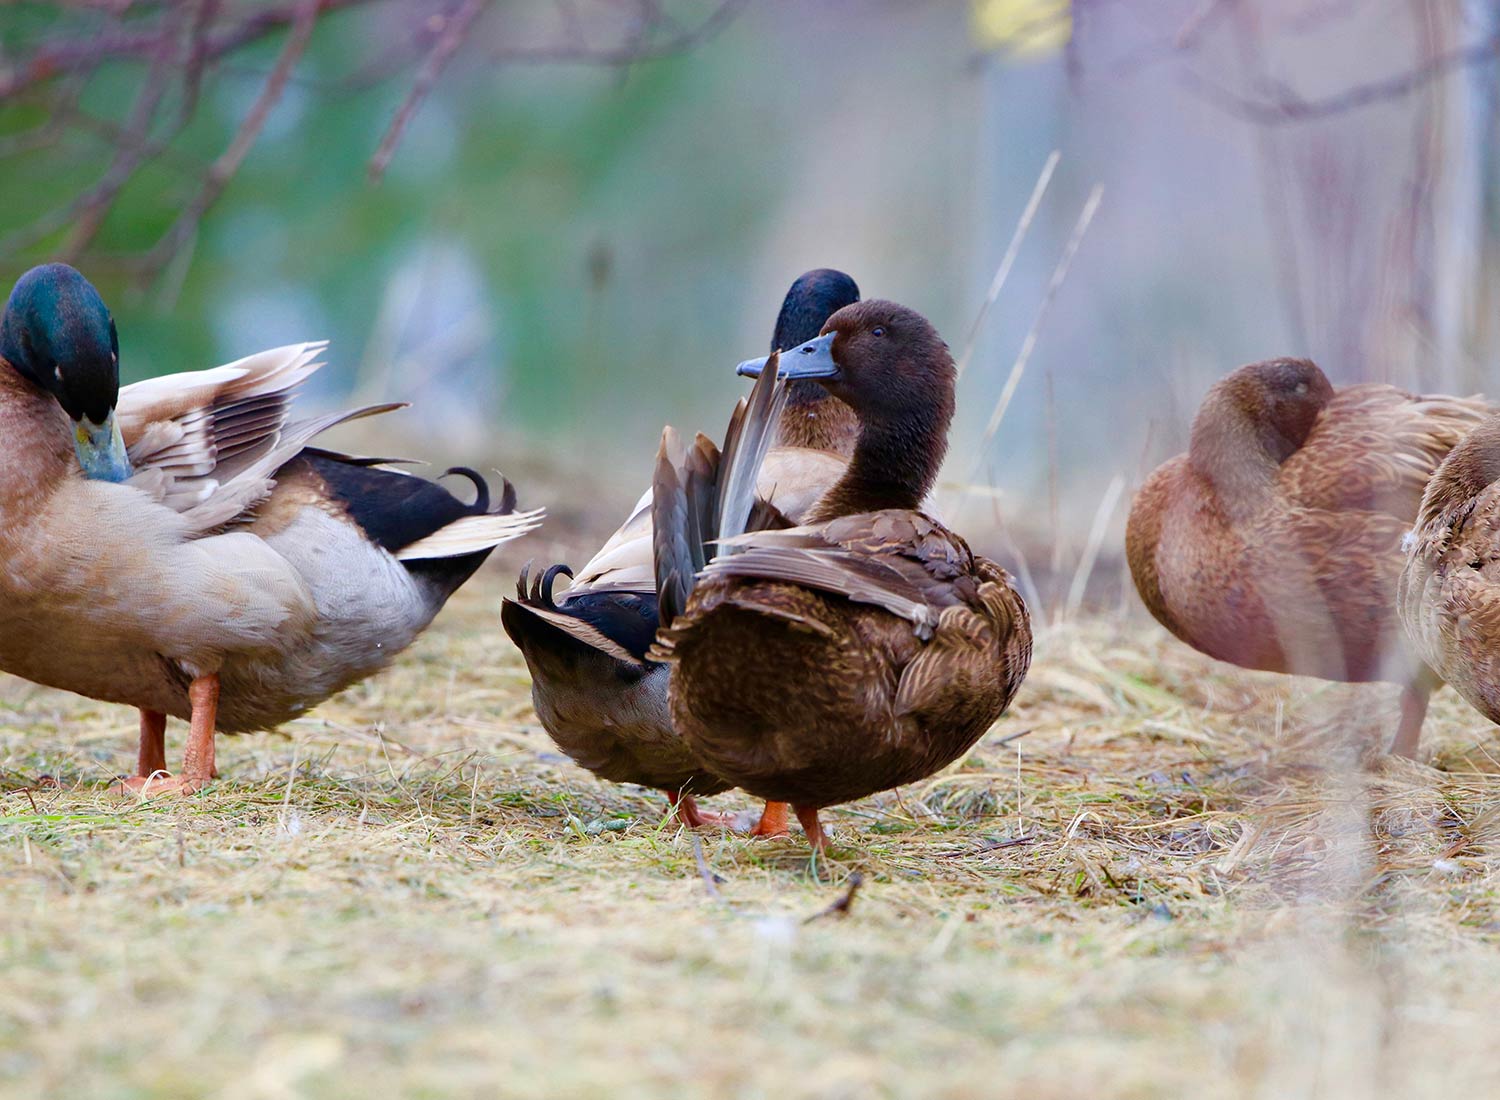 Sanctuary at SHO: redefining animal agriculture | partnering with 100+ rescued ducks to steward non-harming perennial food systems  